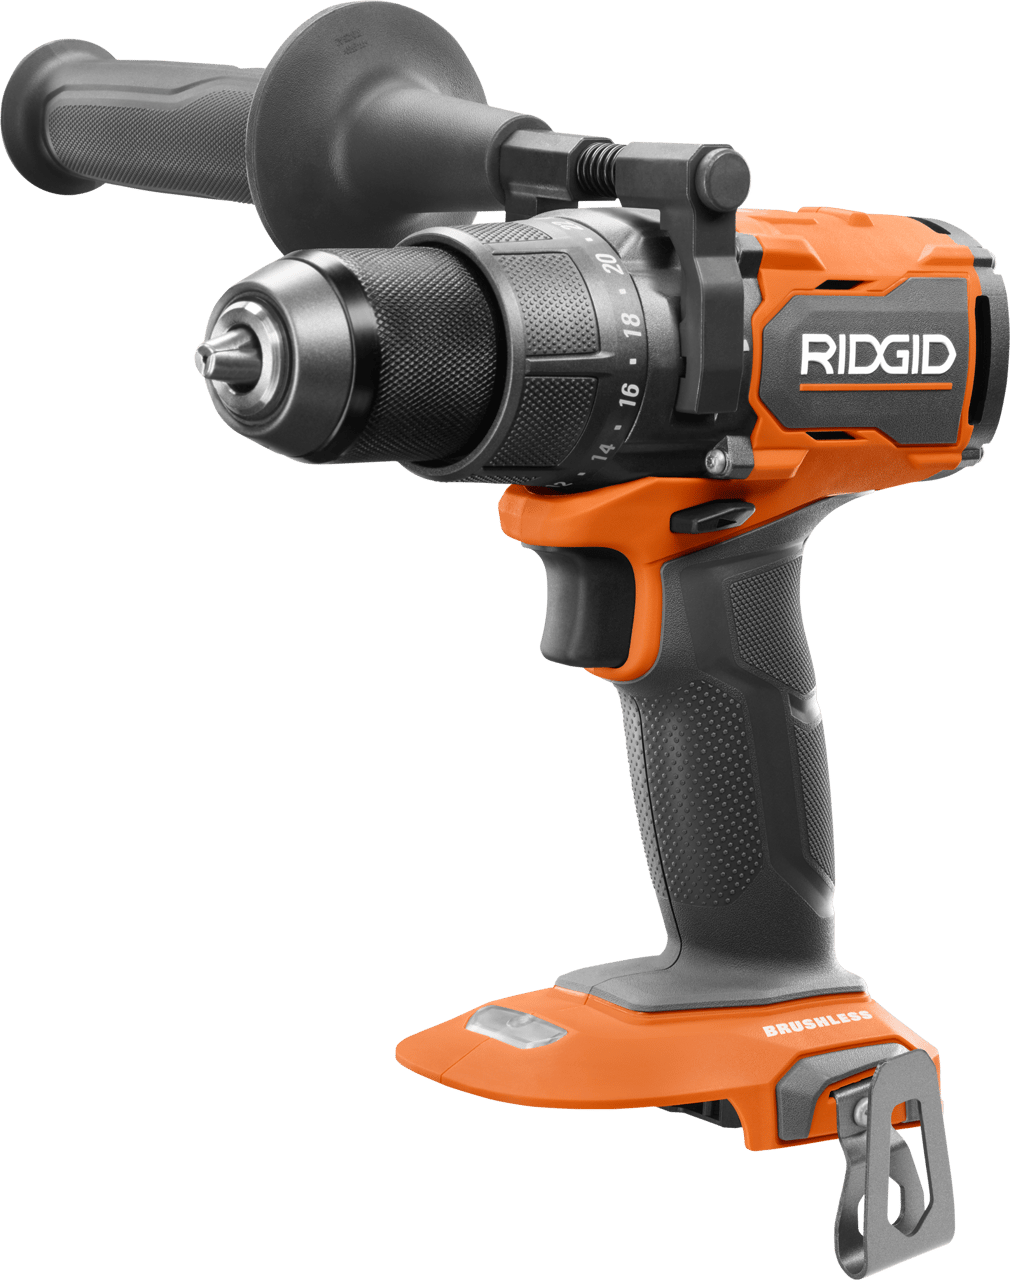 Handheld power drill, Pneumatic tool, Impact wrench, Camera accessory, Line